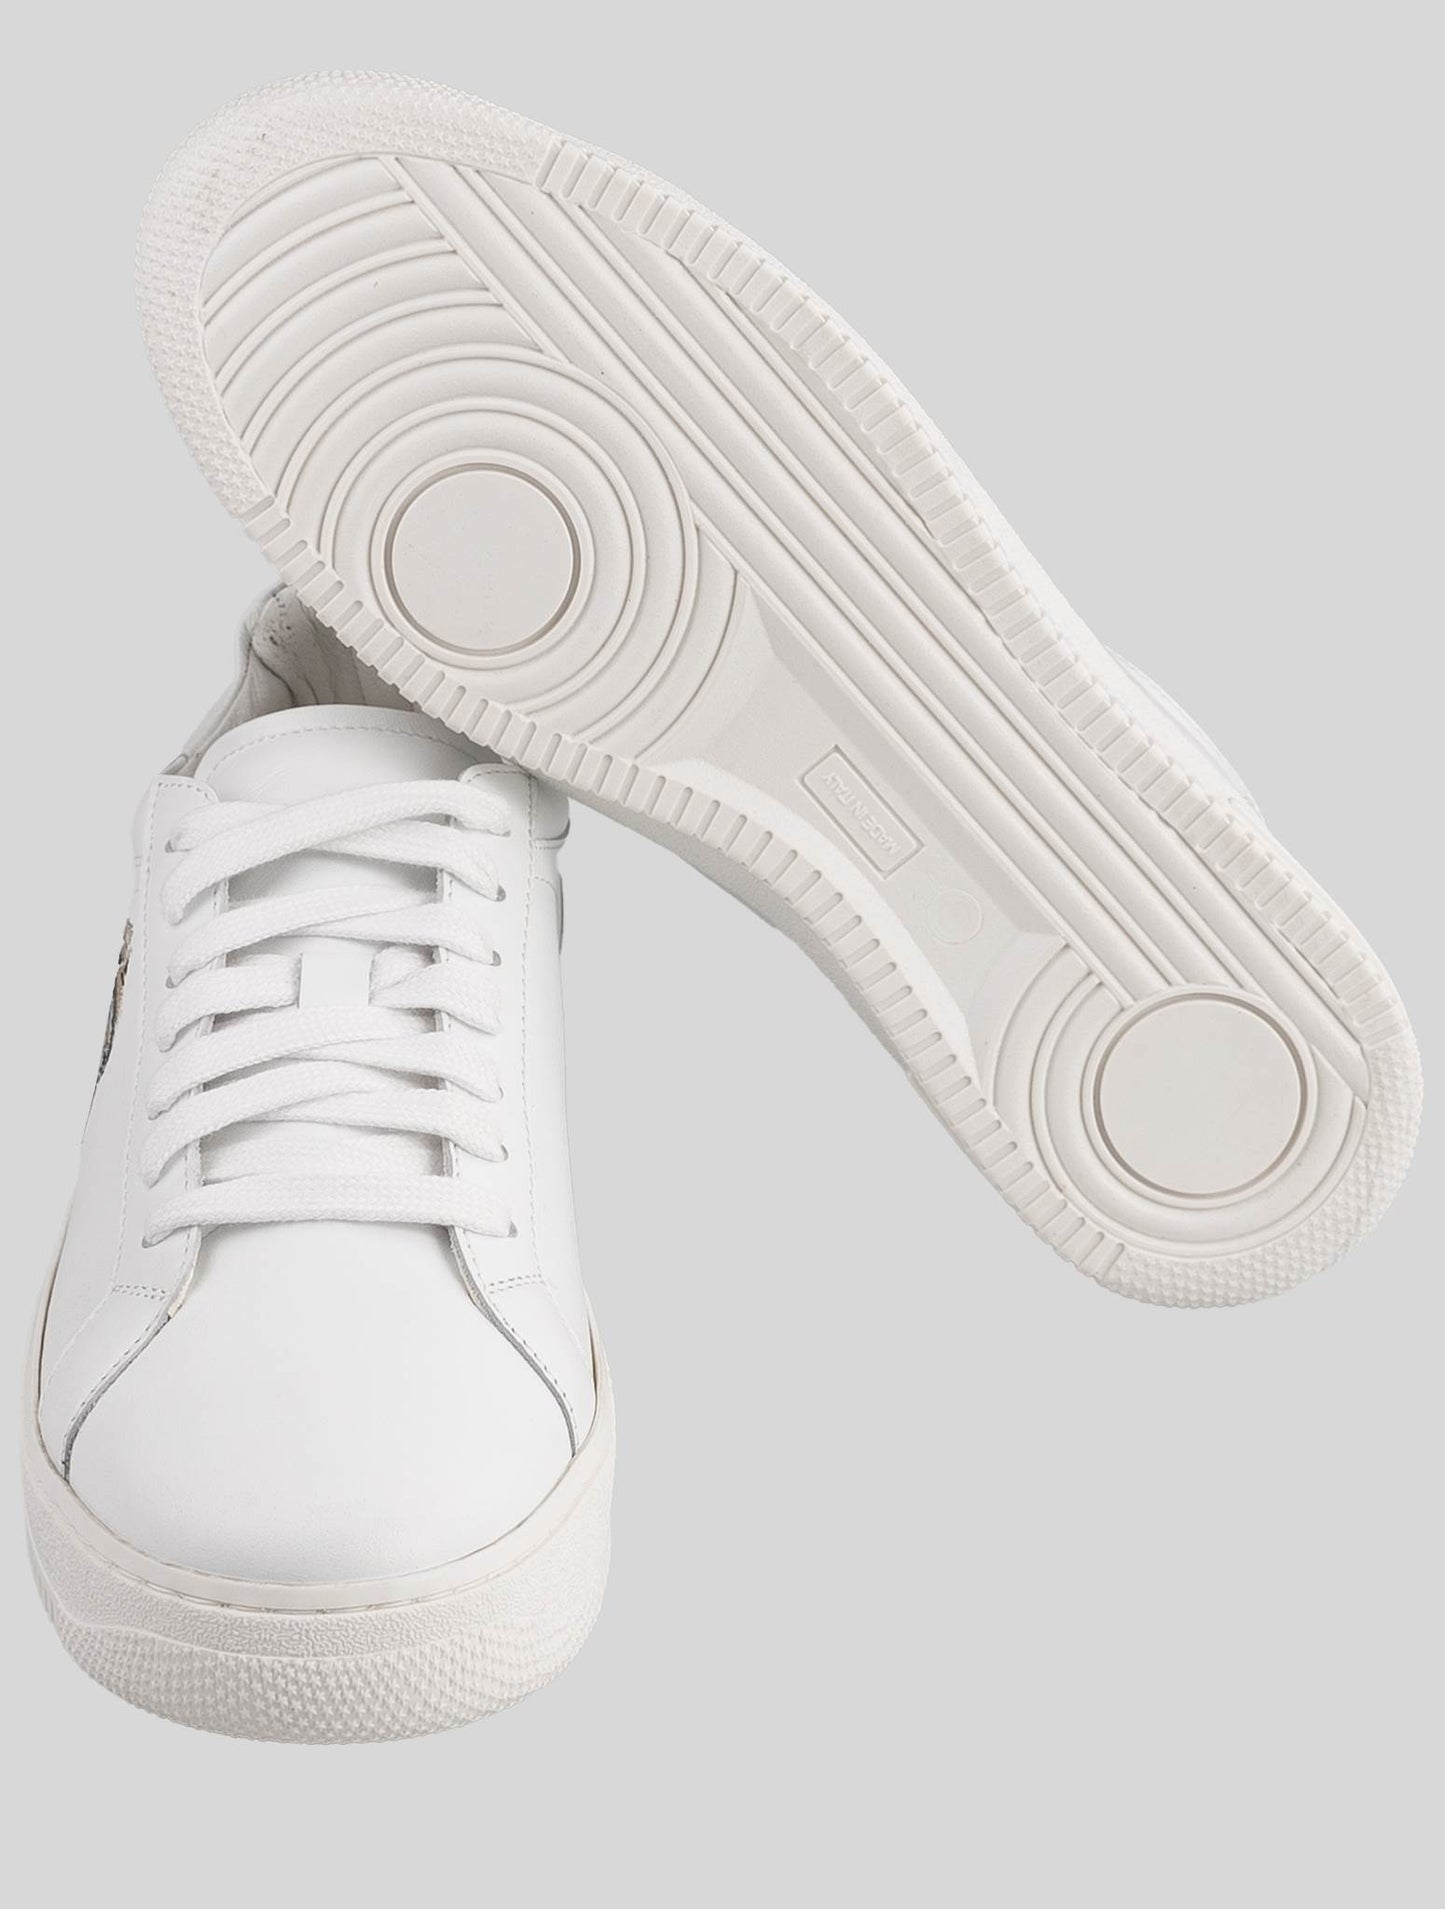 KNT Kiton White Leather Sneakers Special Edition